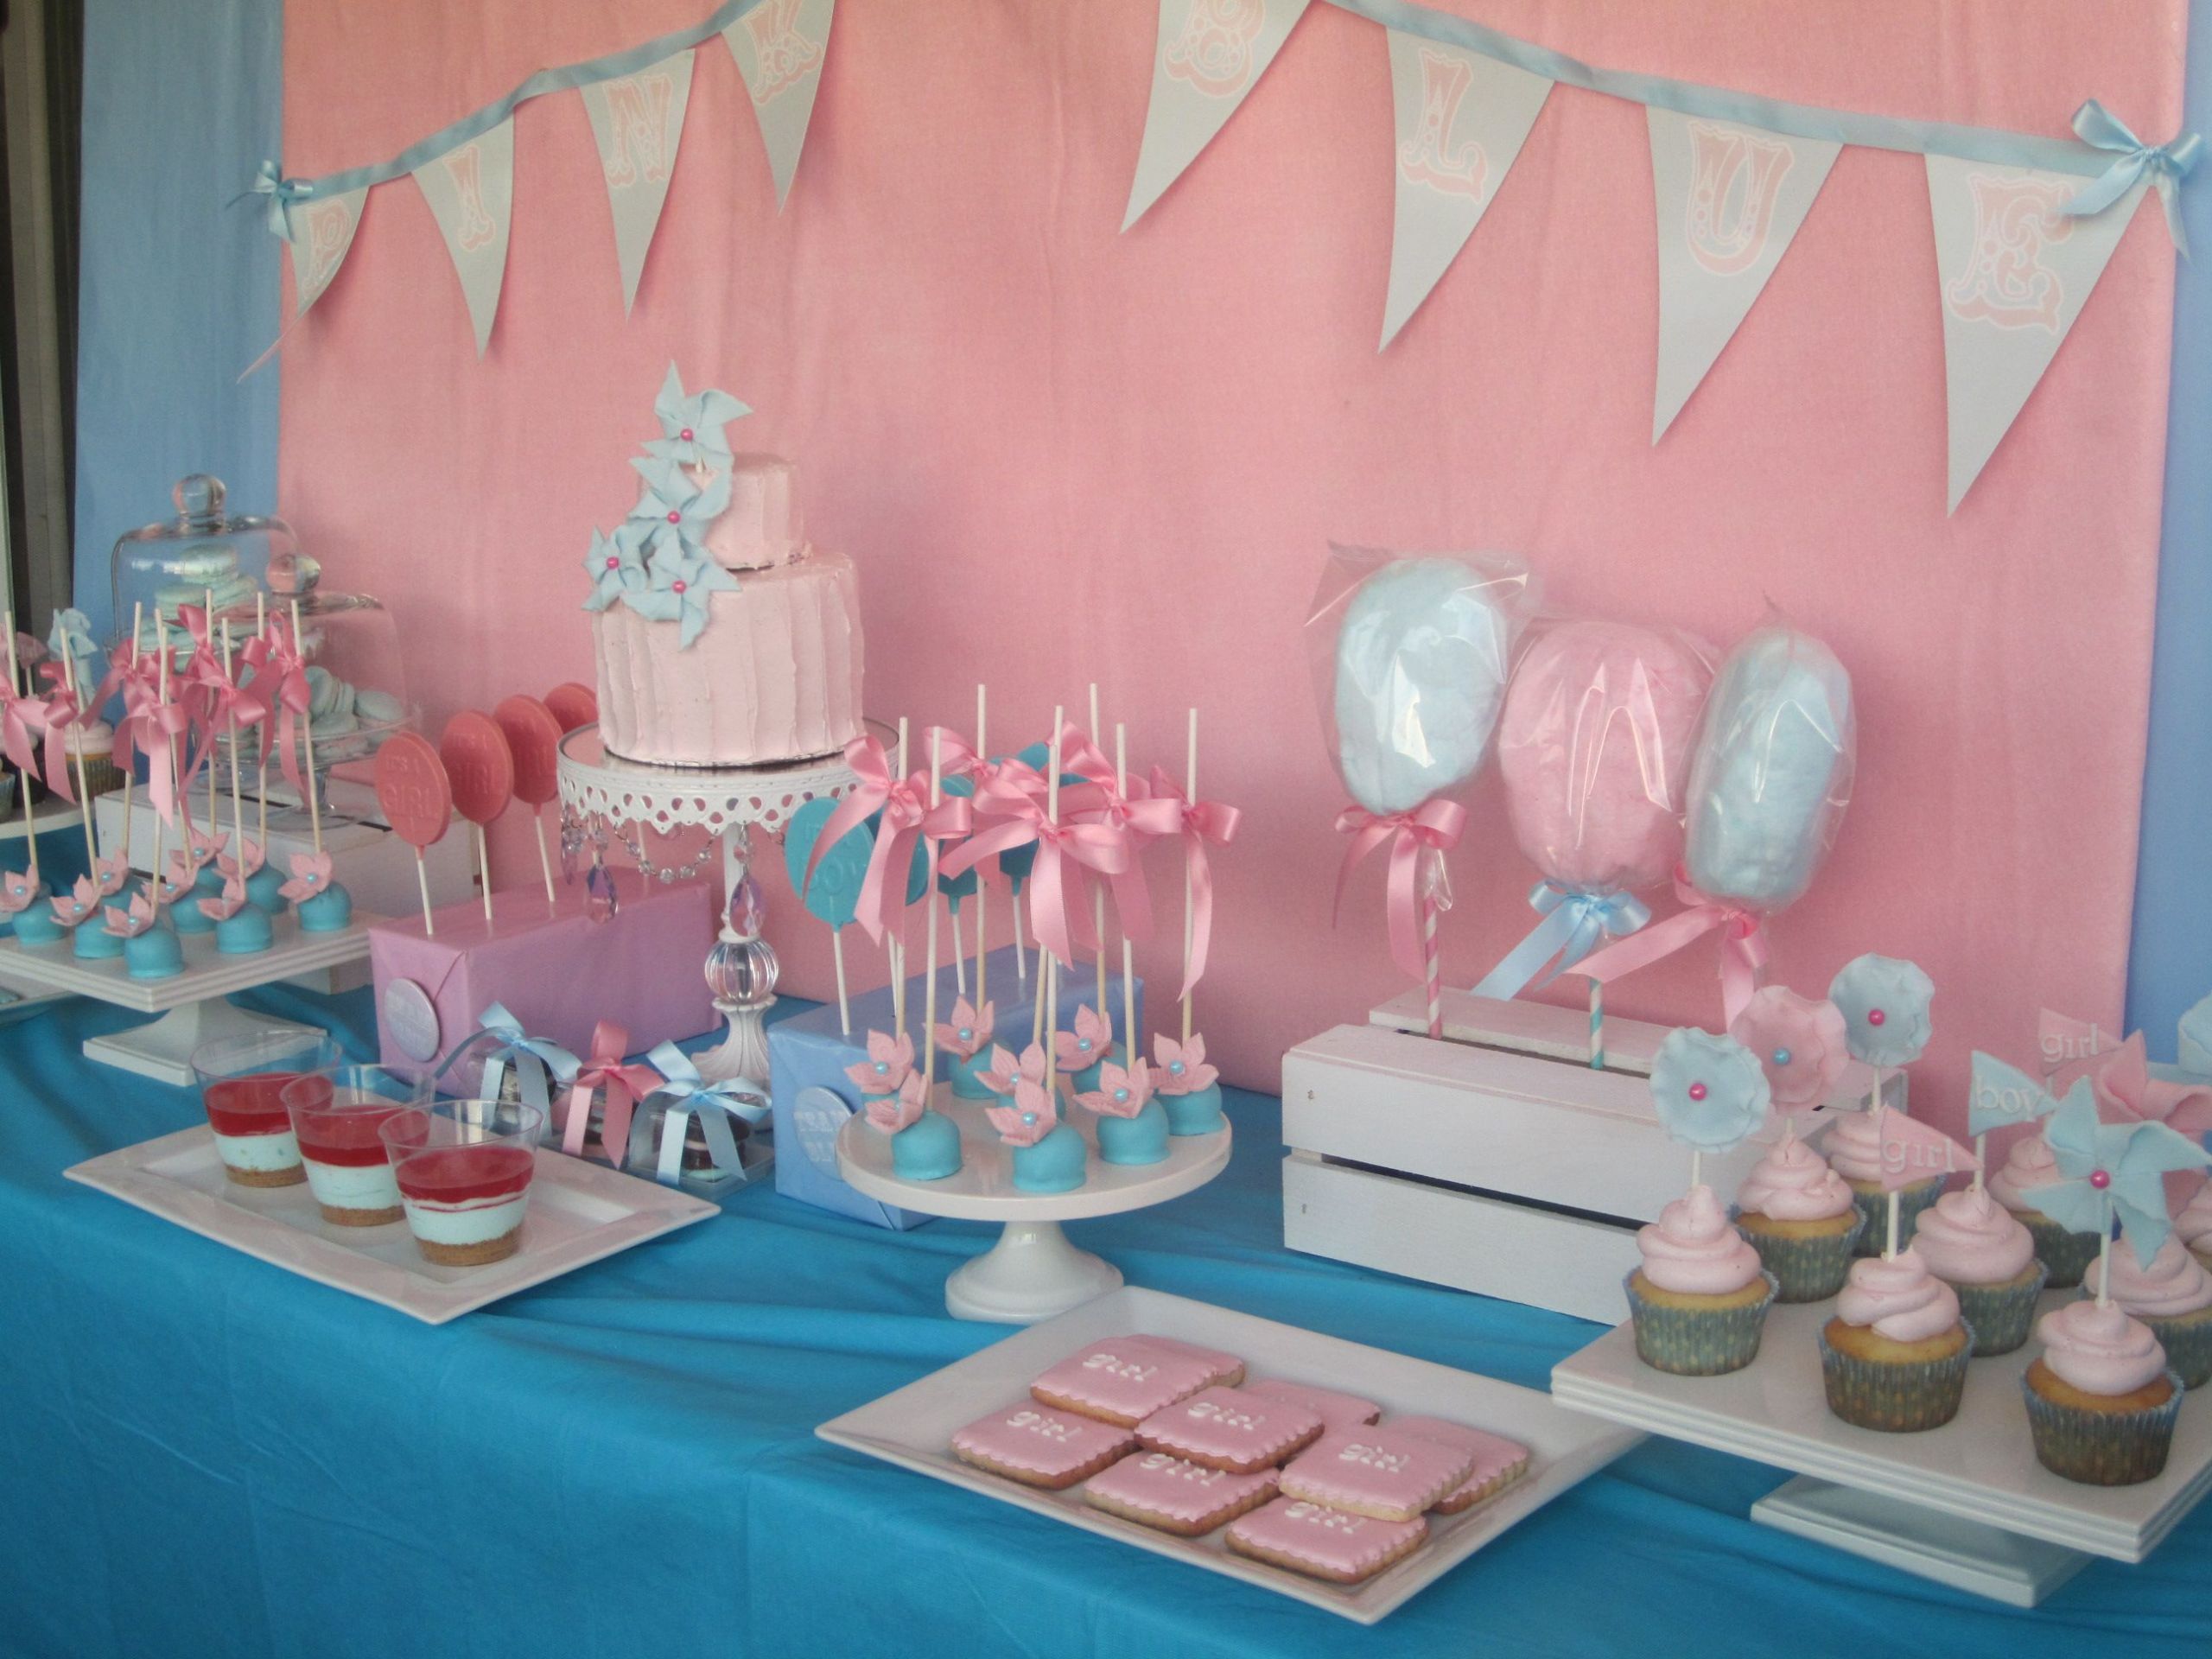 Dessert Ideas For Gender Reveal Party
 side view of dessert table